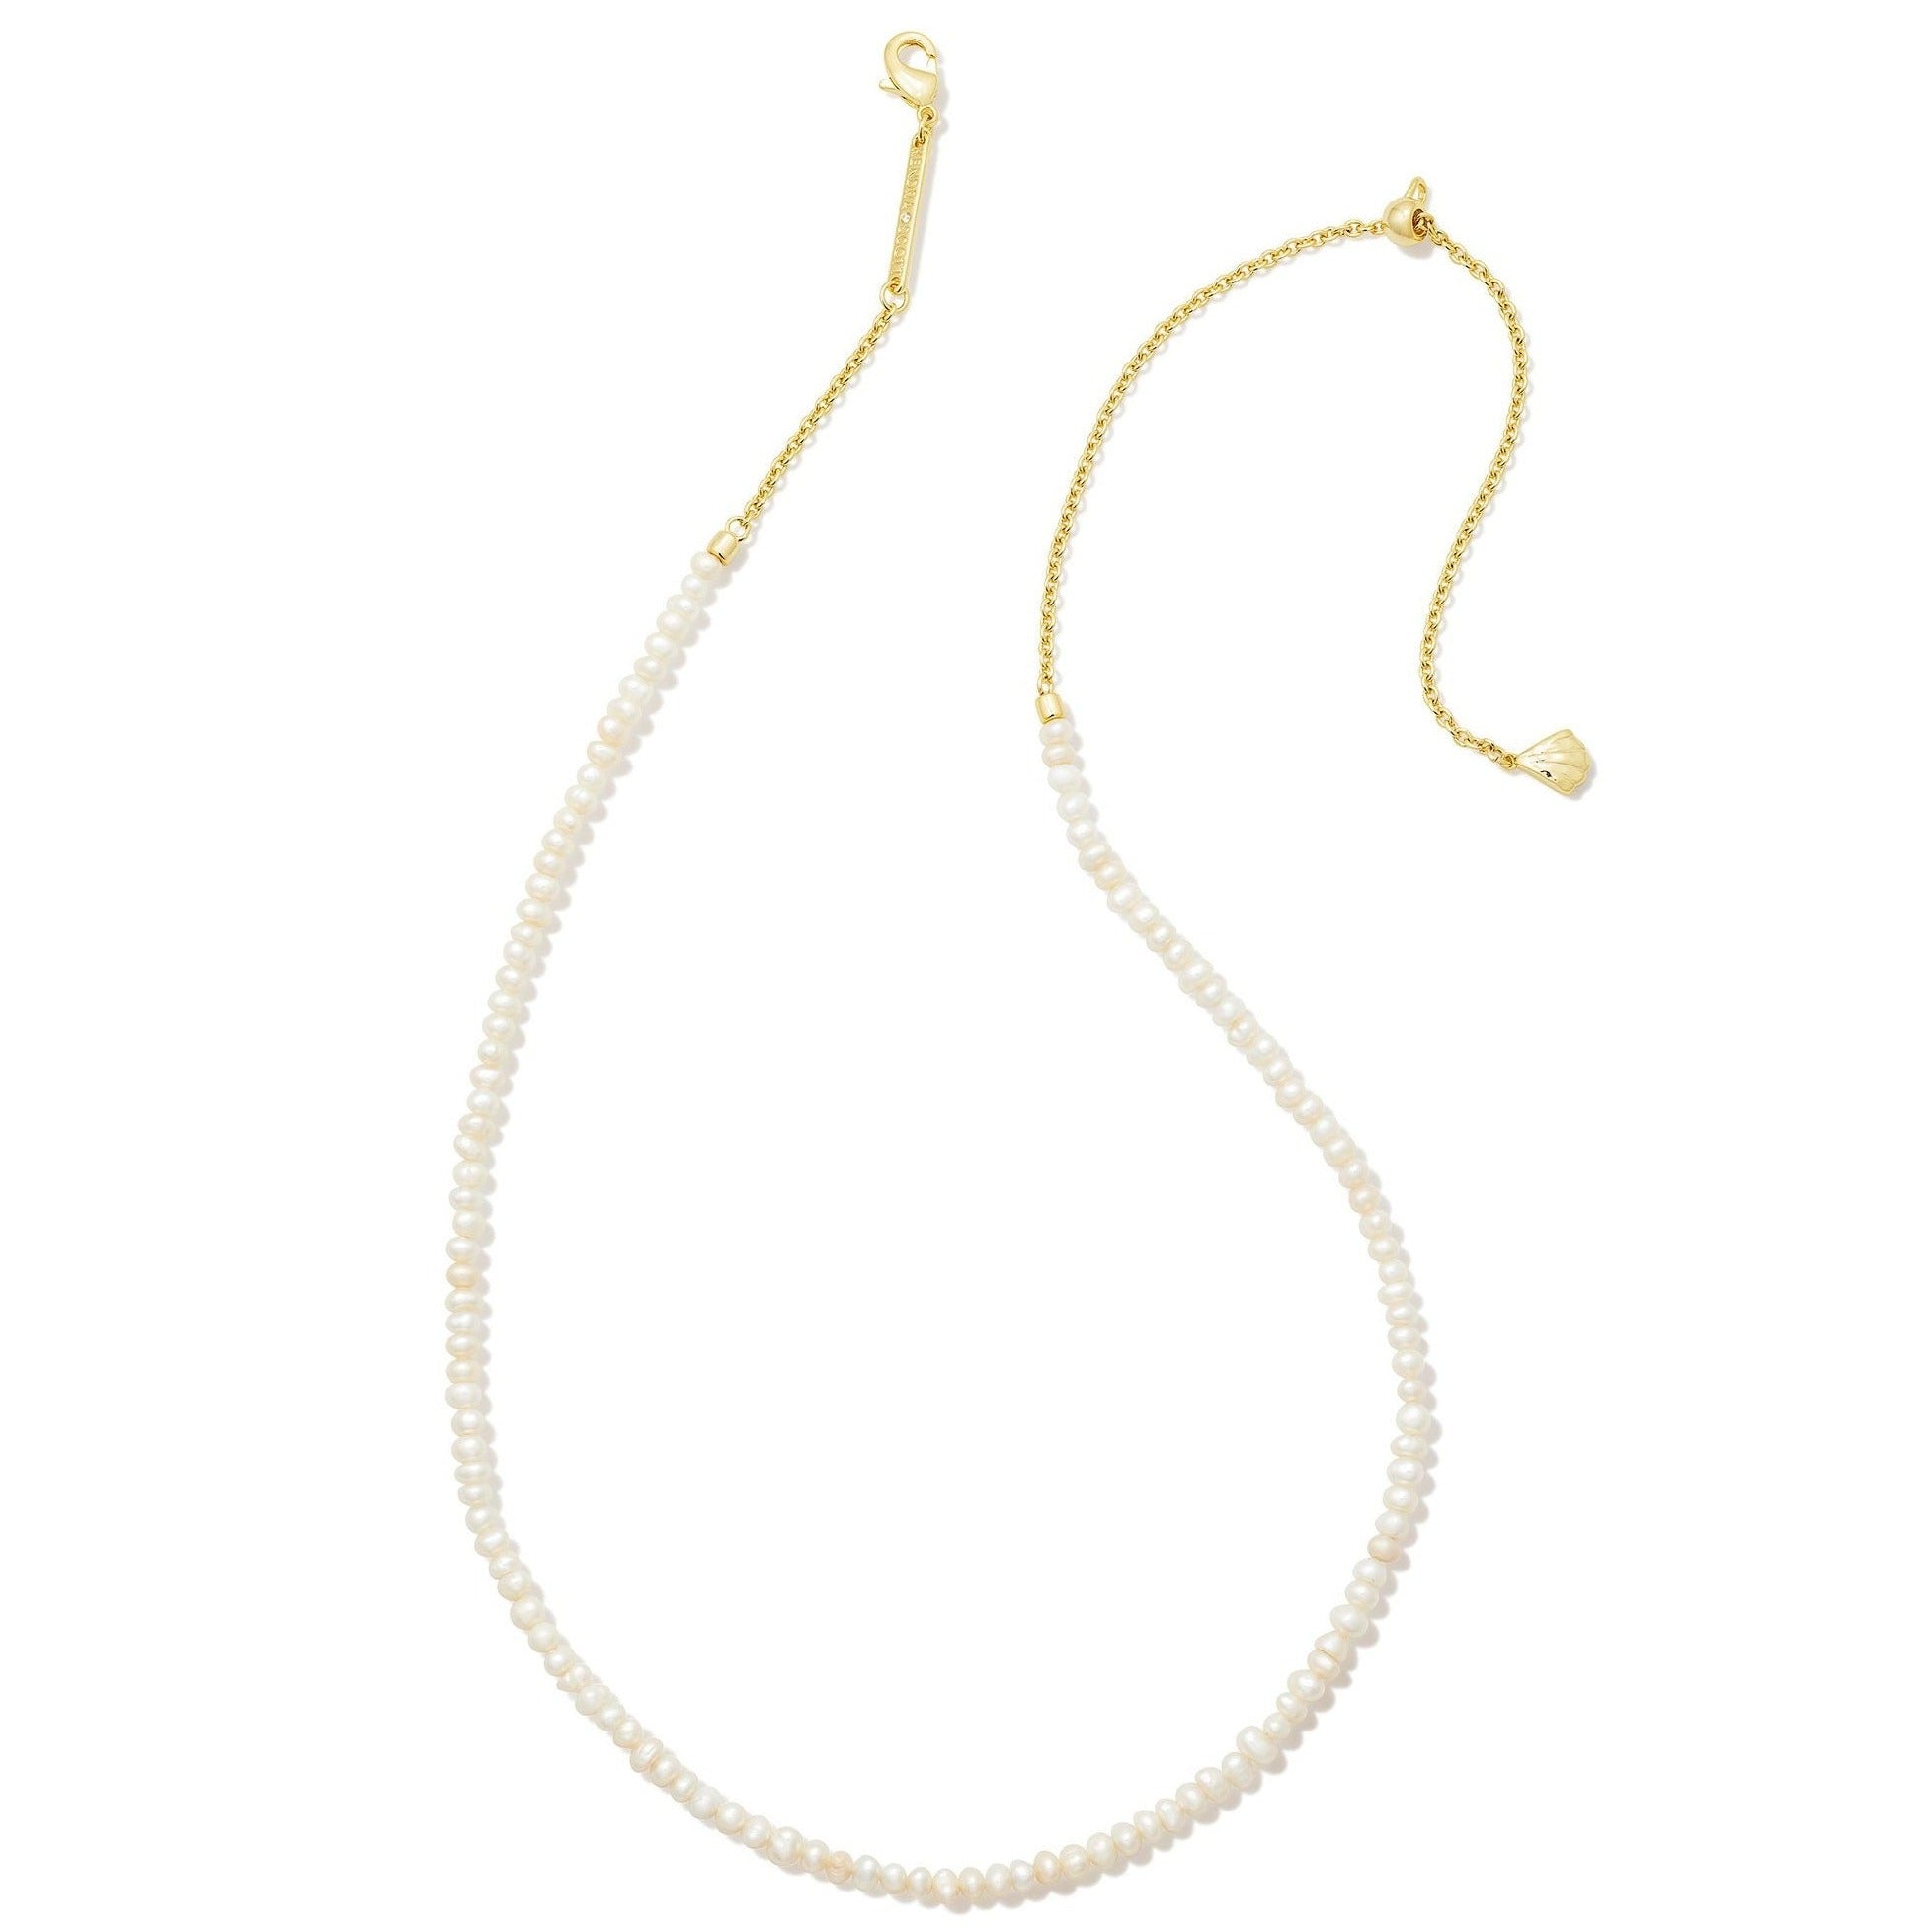 Kendra Scott | Lolo Gold Strand Necklace in White Pearl - Giddy Up Glamour Boutique